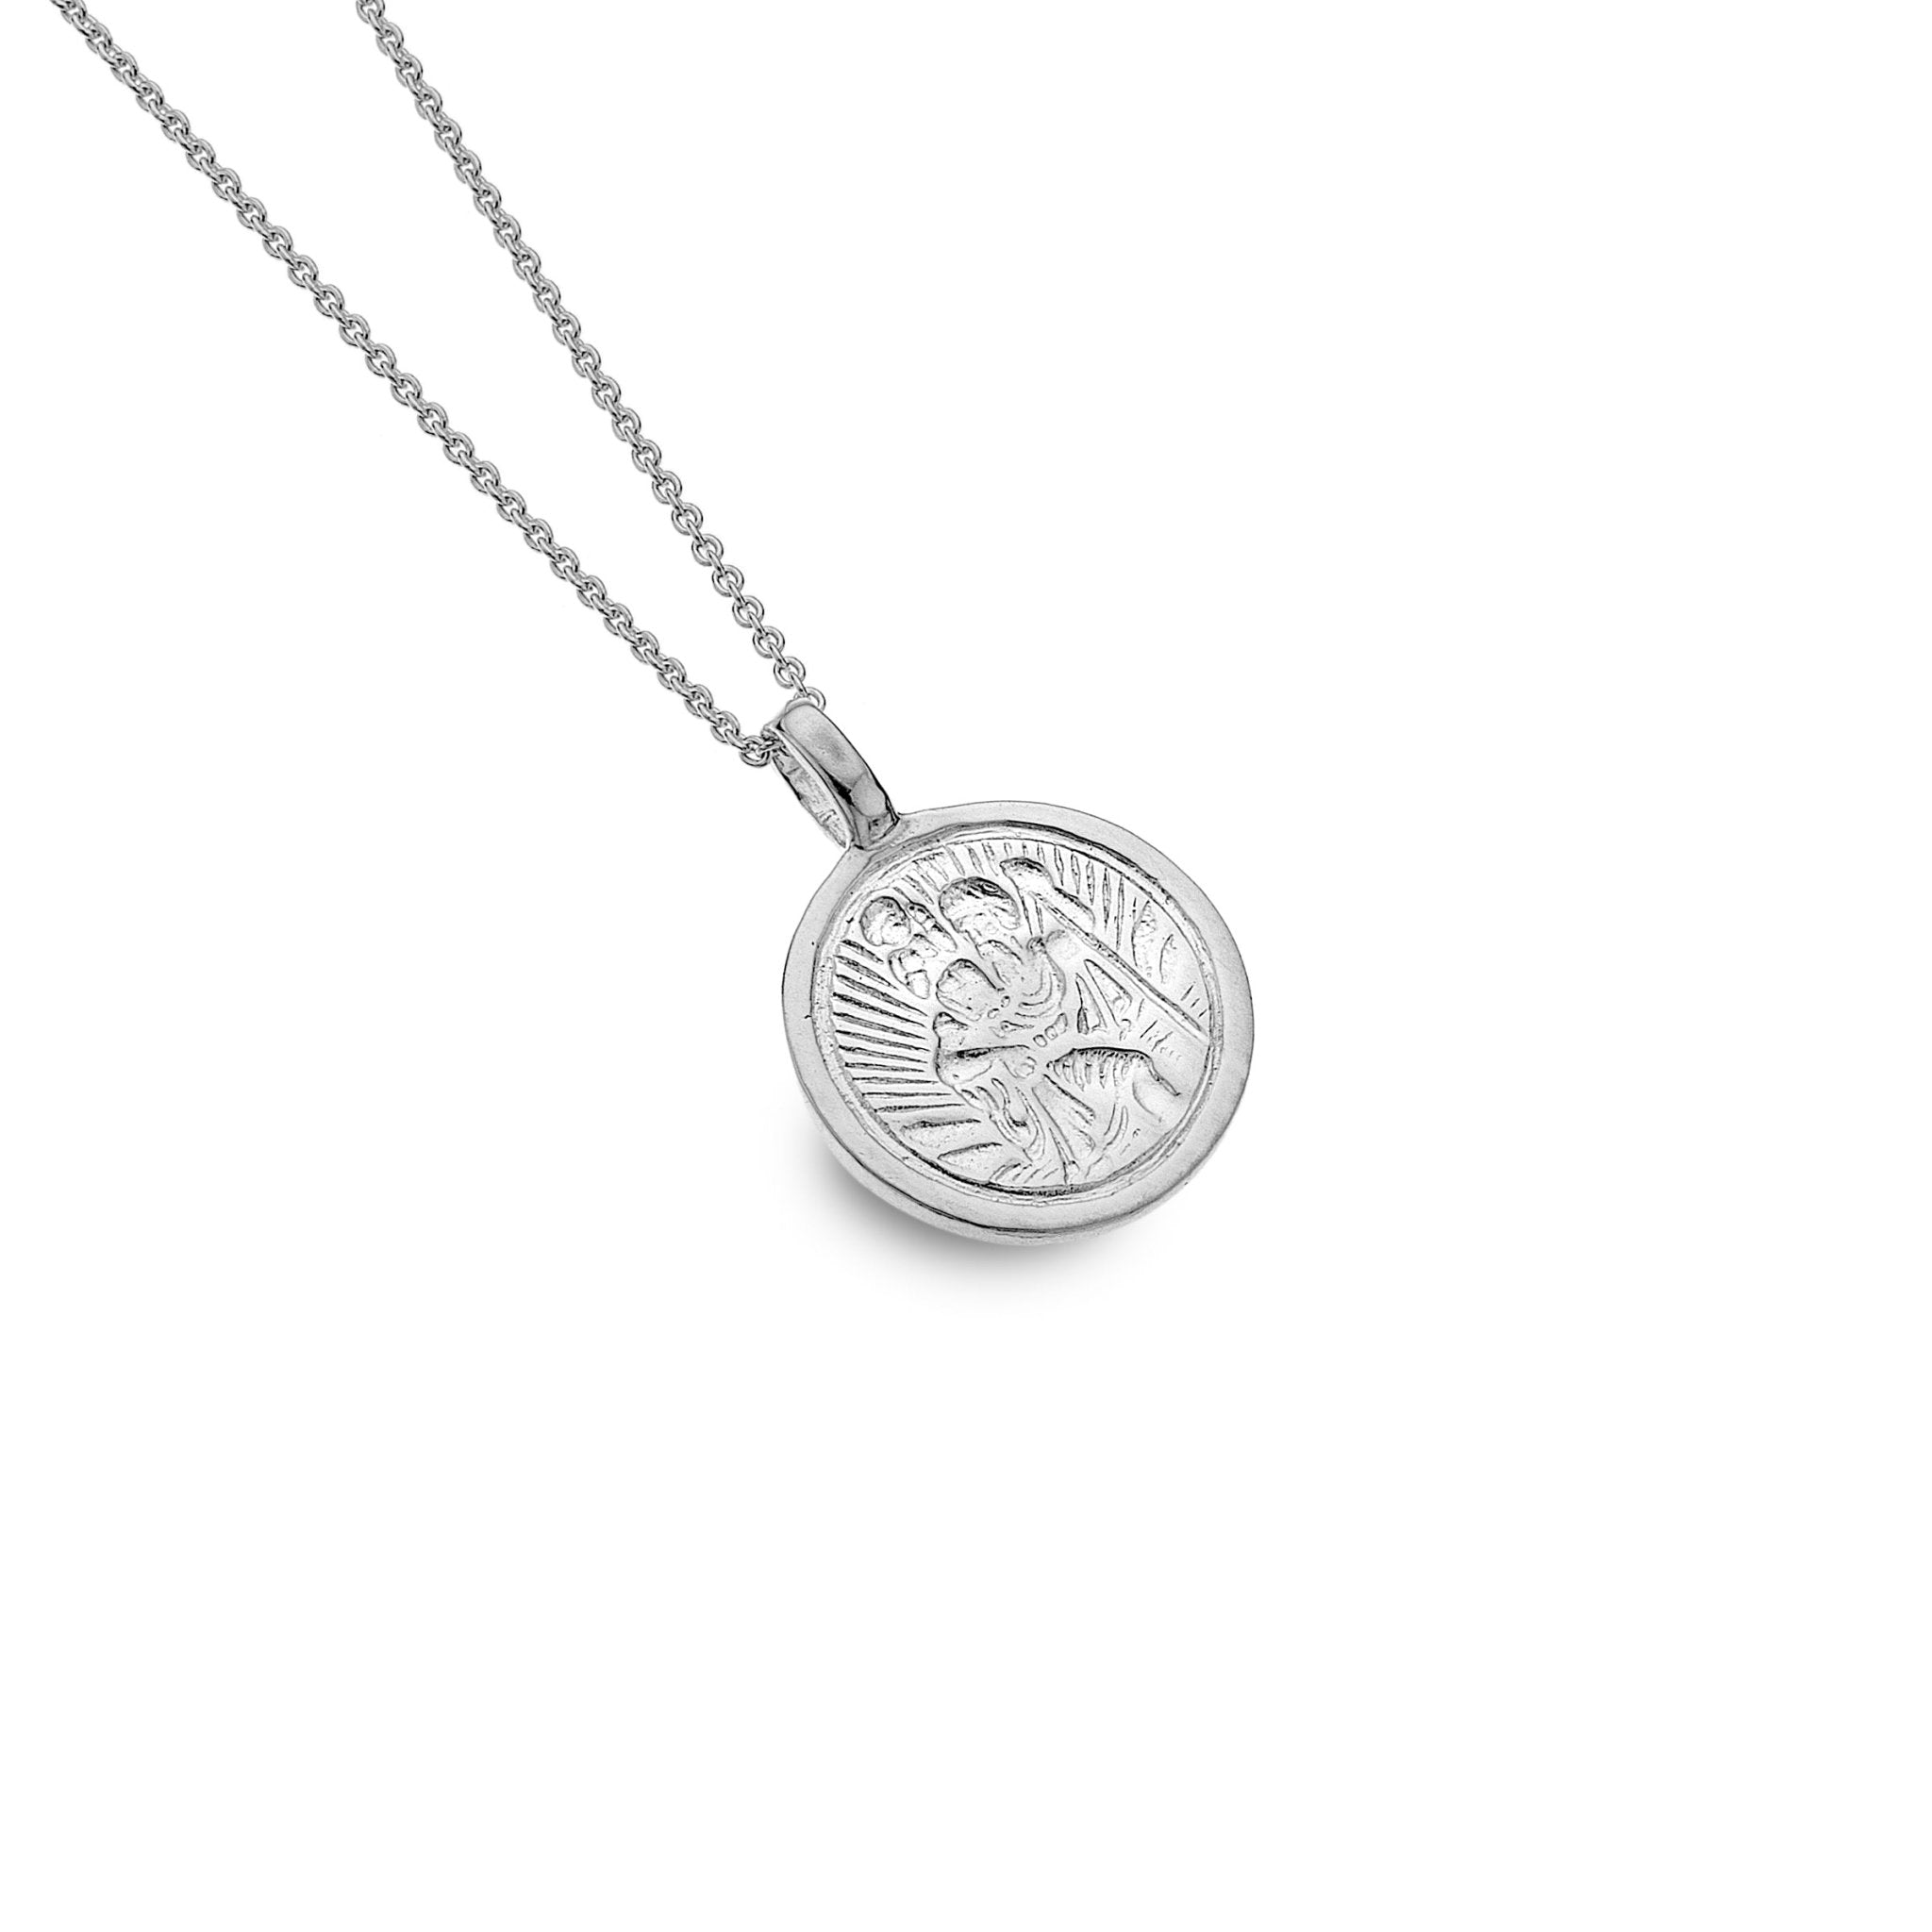 Amazon.com: Alexander Castle Small 925 Sterling Silver St Christopher  Necklace for Boys Girls - 14mm Saint Christopher Medal with 18